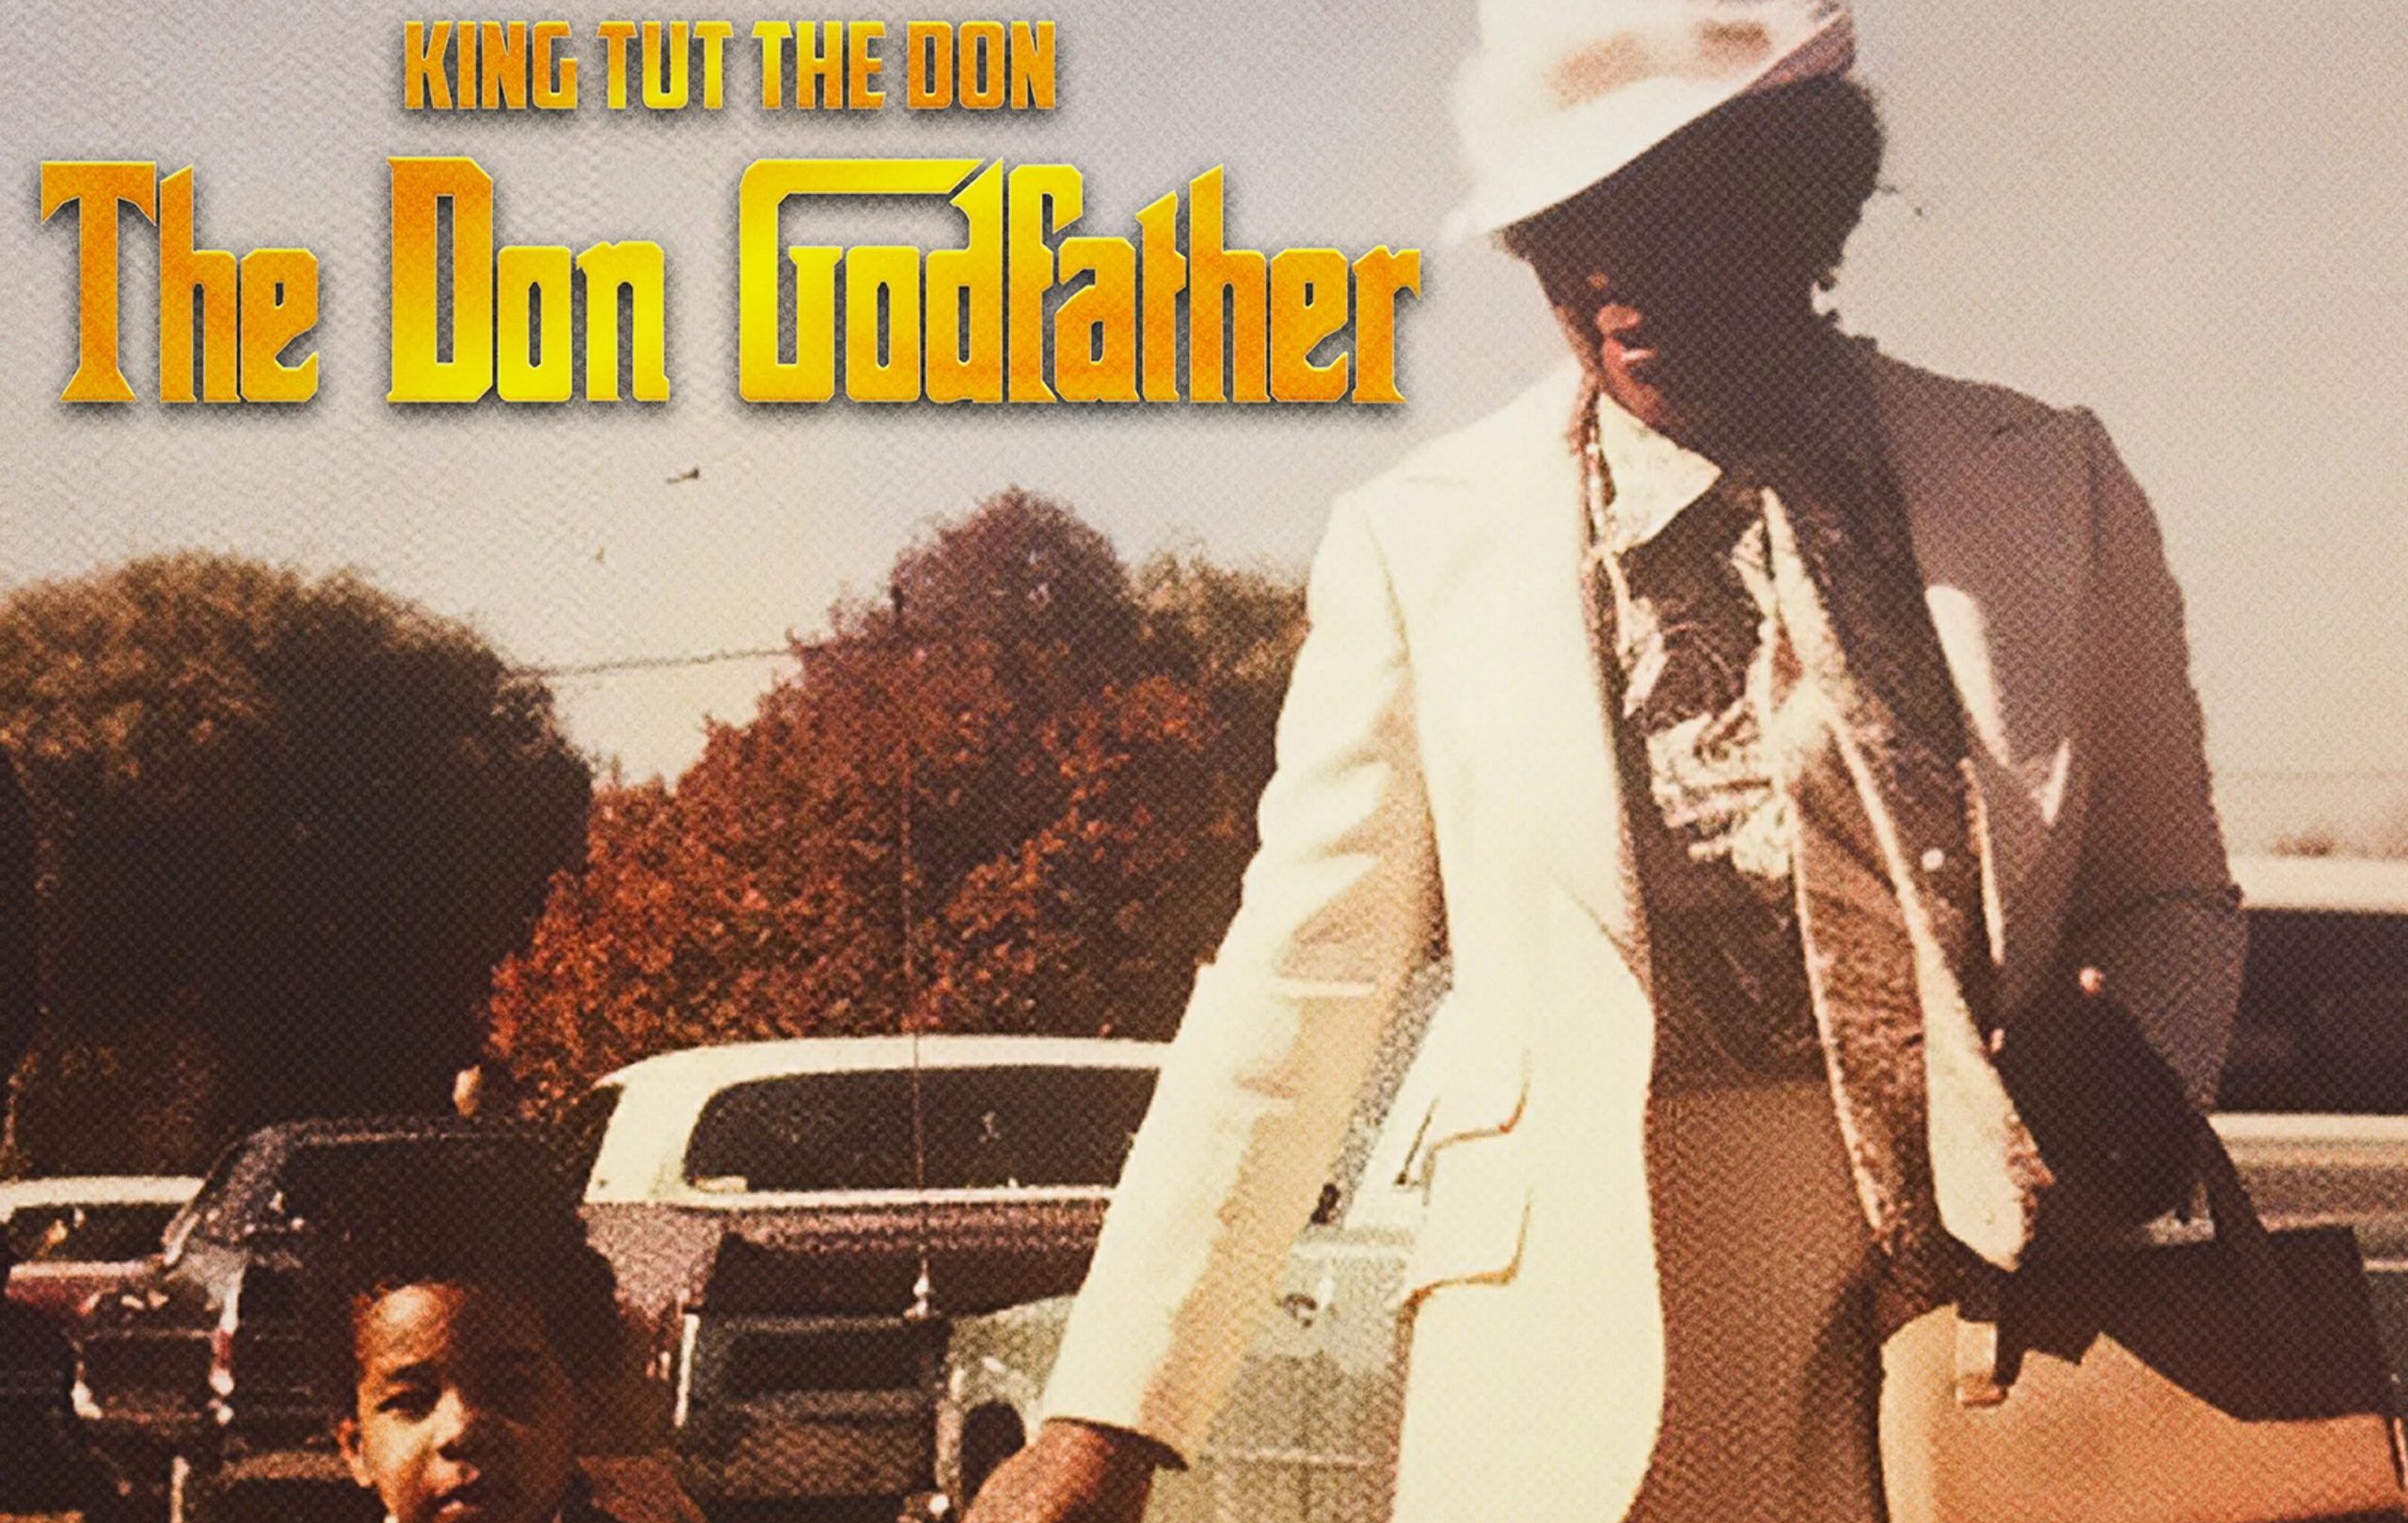 King Tut The Don Kills It In New Album 'The Don Godfather Vol 1'